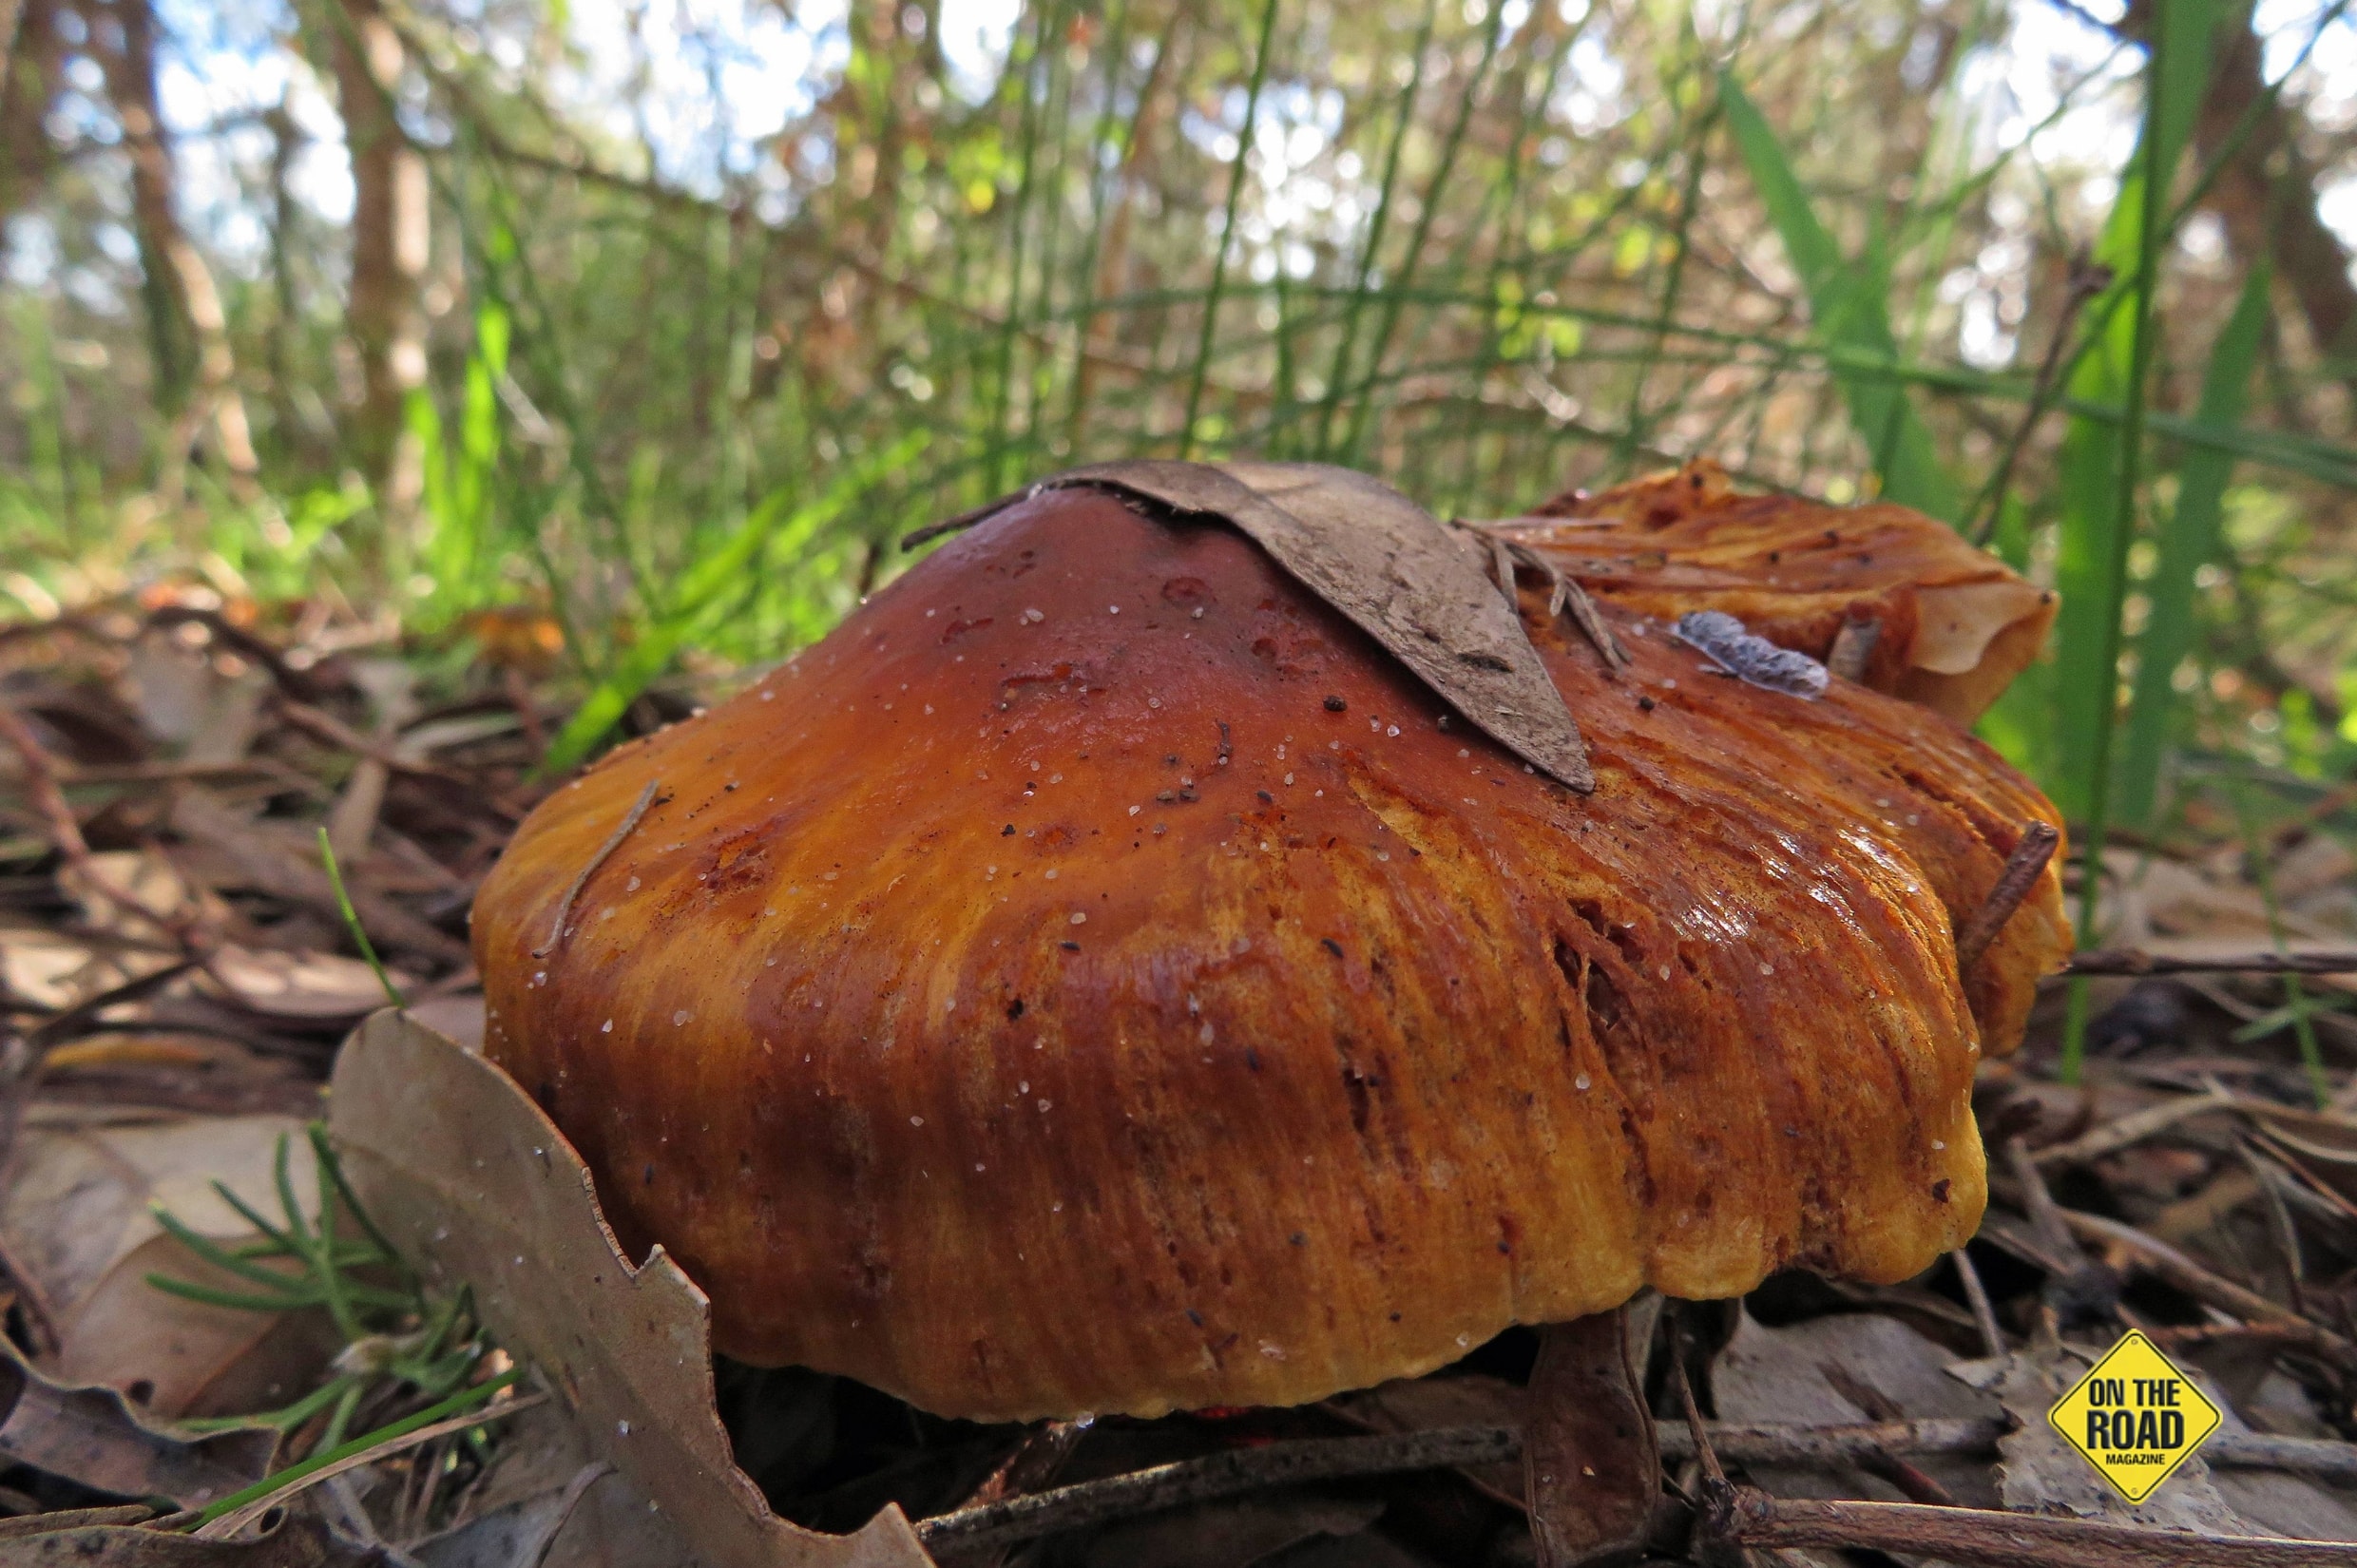 Fungi are natural recyclers. They typically grow in leaf litter and on dead wood.